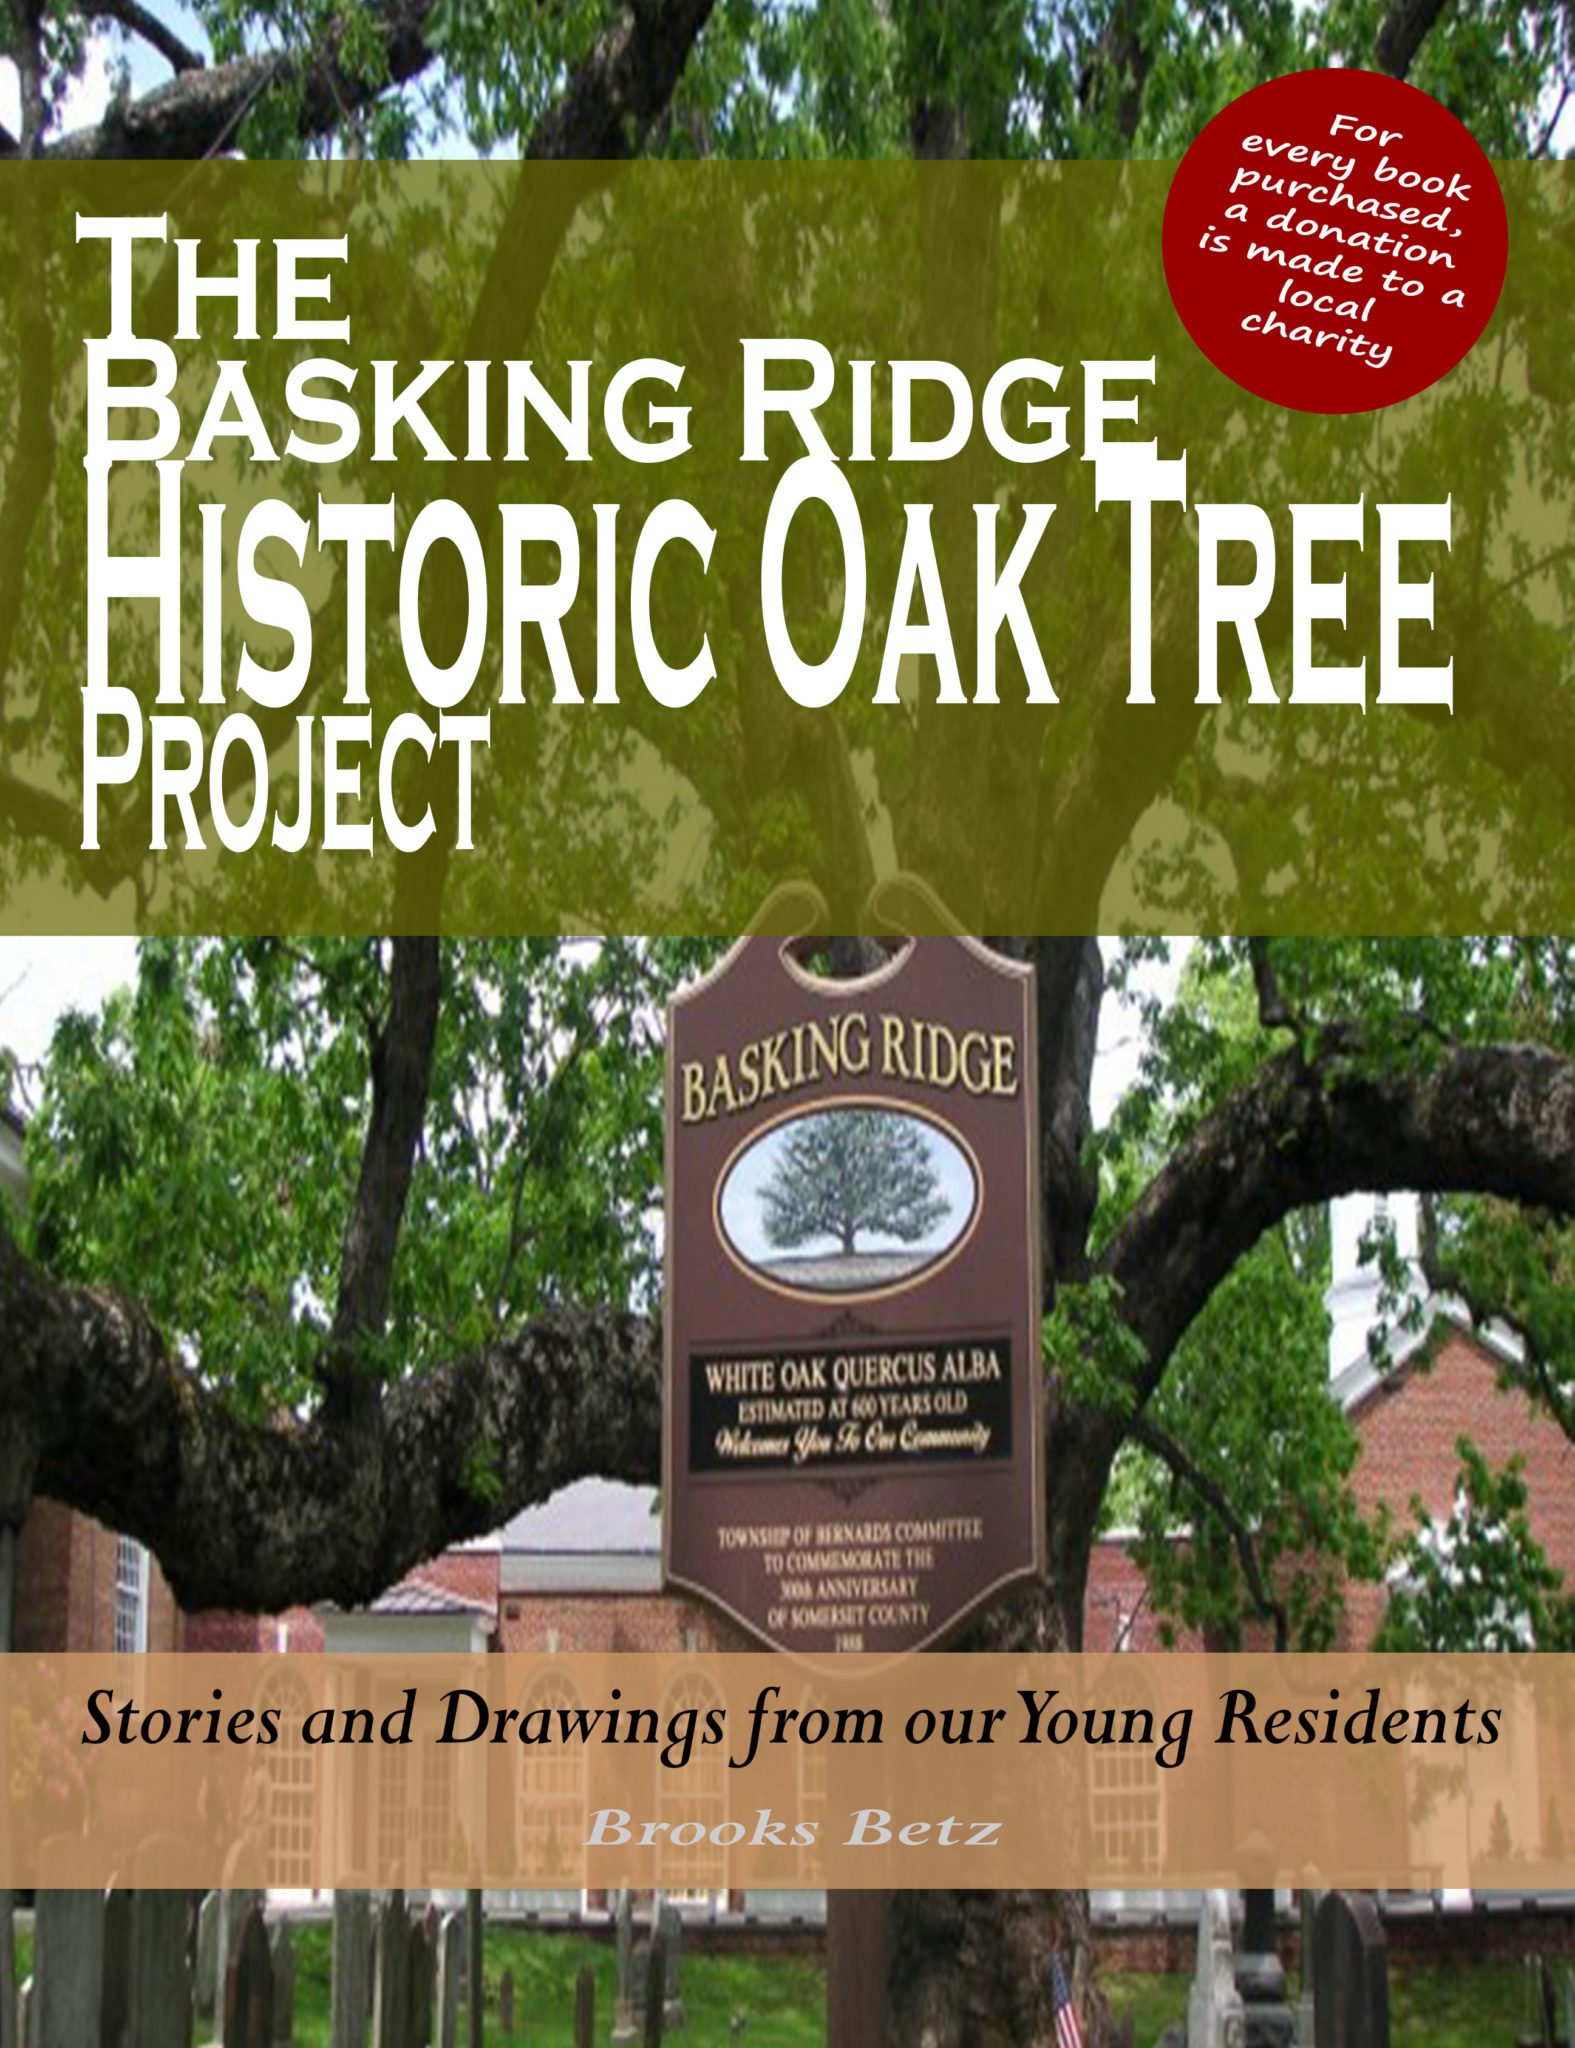 Basking Ridge Historic Oak Tree Project is one of the most heartwarming books ever made to celebrate the life and history of the 619 year oak tree that was lost in 2017. A true collectible. Source: Mr local history